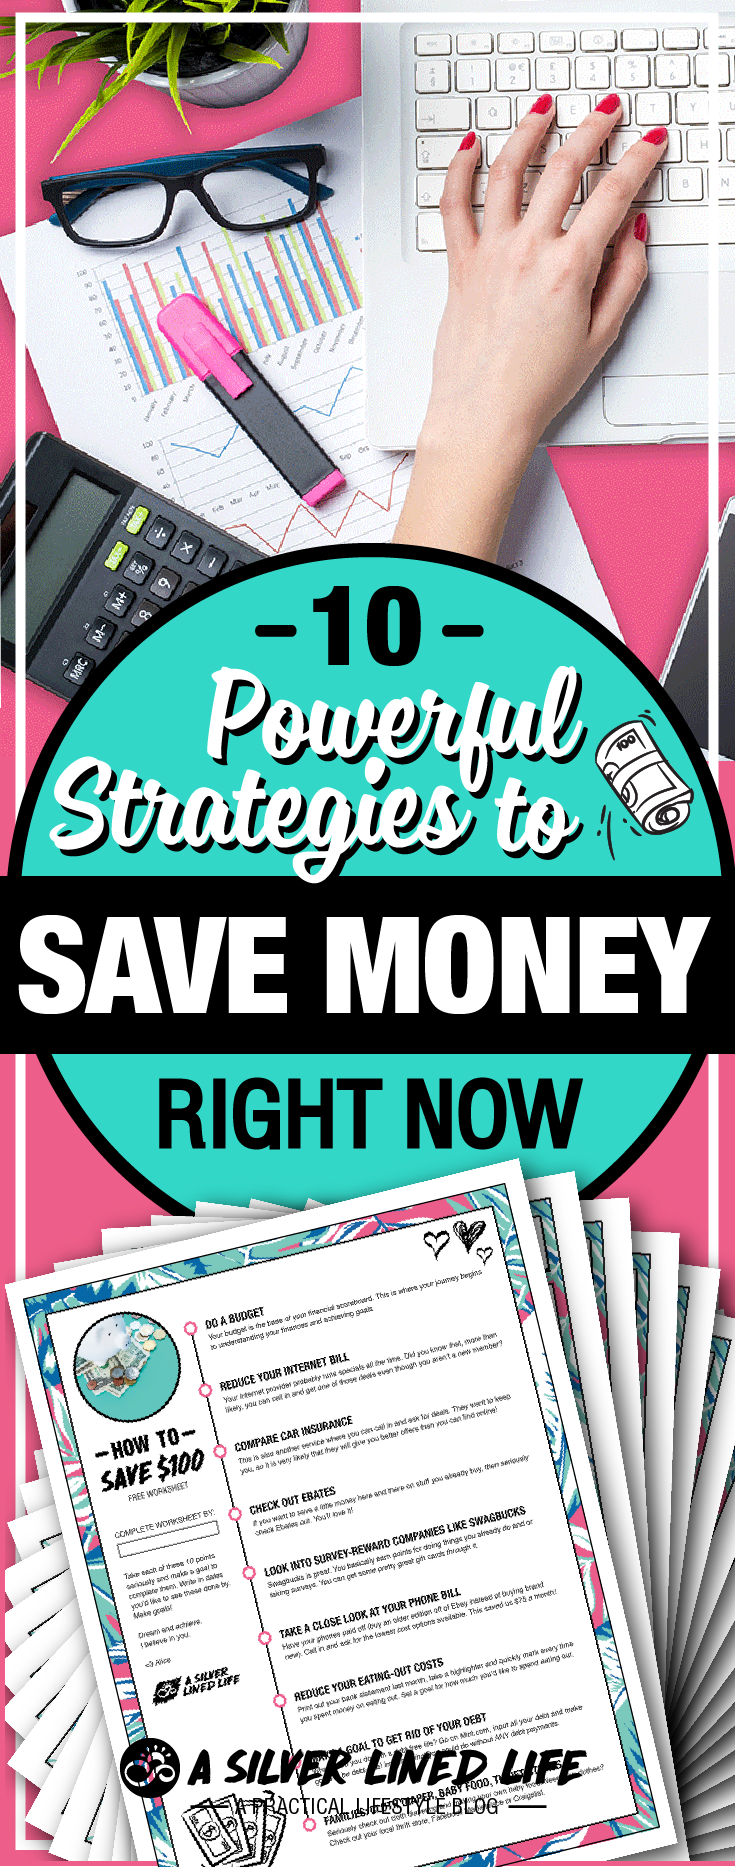 10 Powerful Strategies to Save Money Right Now - Tips and ideas for frugal living you can use to save on groceries, save up for a house, save money in your 20s (the best time!), save money in college and get on a budget. This ten fast hacks will help you accomplish your monthly, biweekly and yearly goals. Save a ton of money on bills and move forward out of debt!!! #SLL